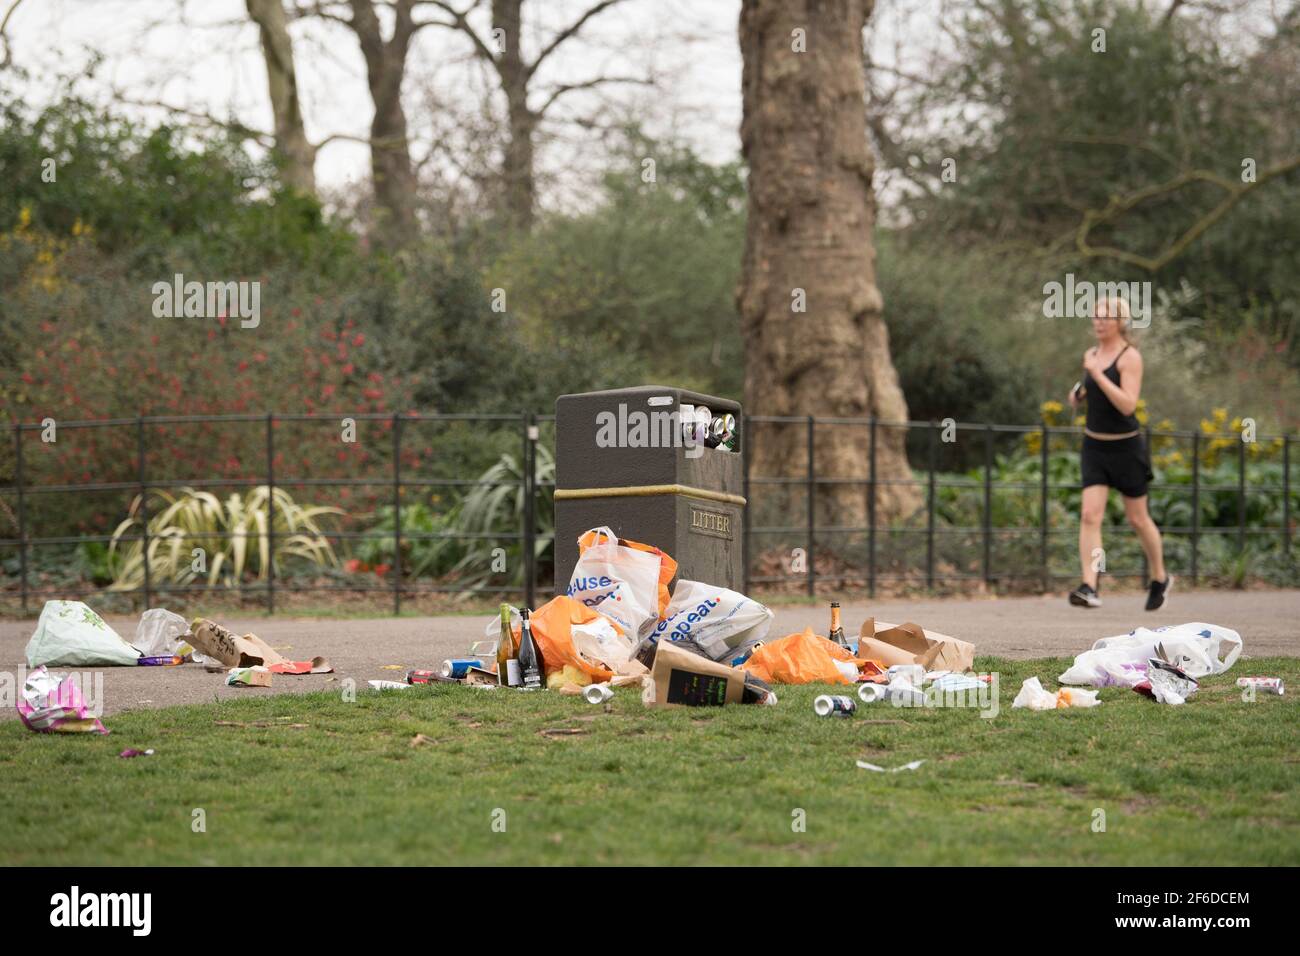 Bins overflow with rubbish in Battersea Park in south London after yesterday's record breaking warm weather. Picture date: Wednesday March 31, 2021. The UK may be about to experience its hottest March on record with temperatures forecast to soar to around 25C (77F). Stock Photo